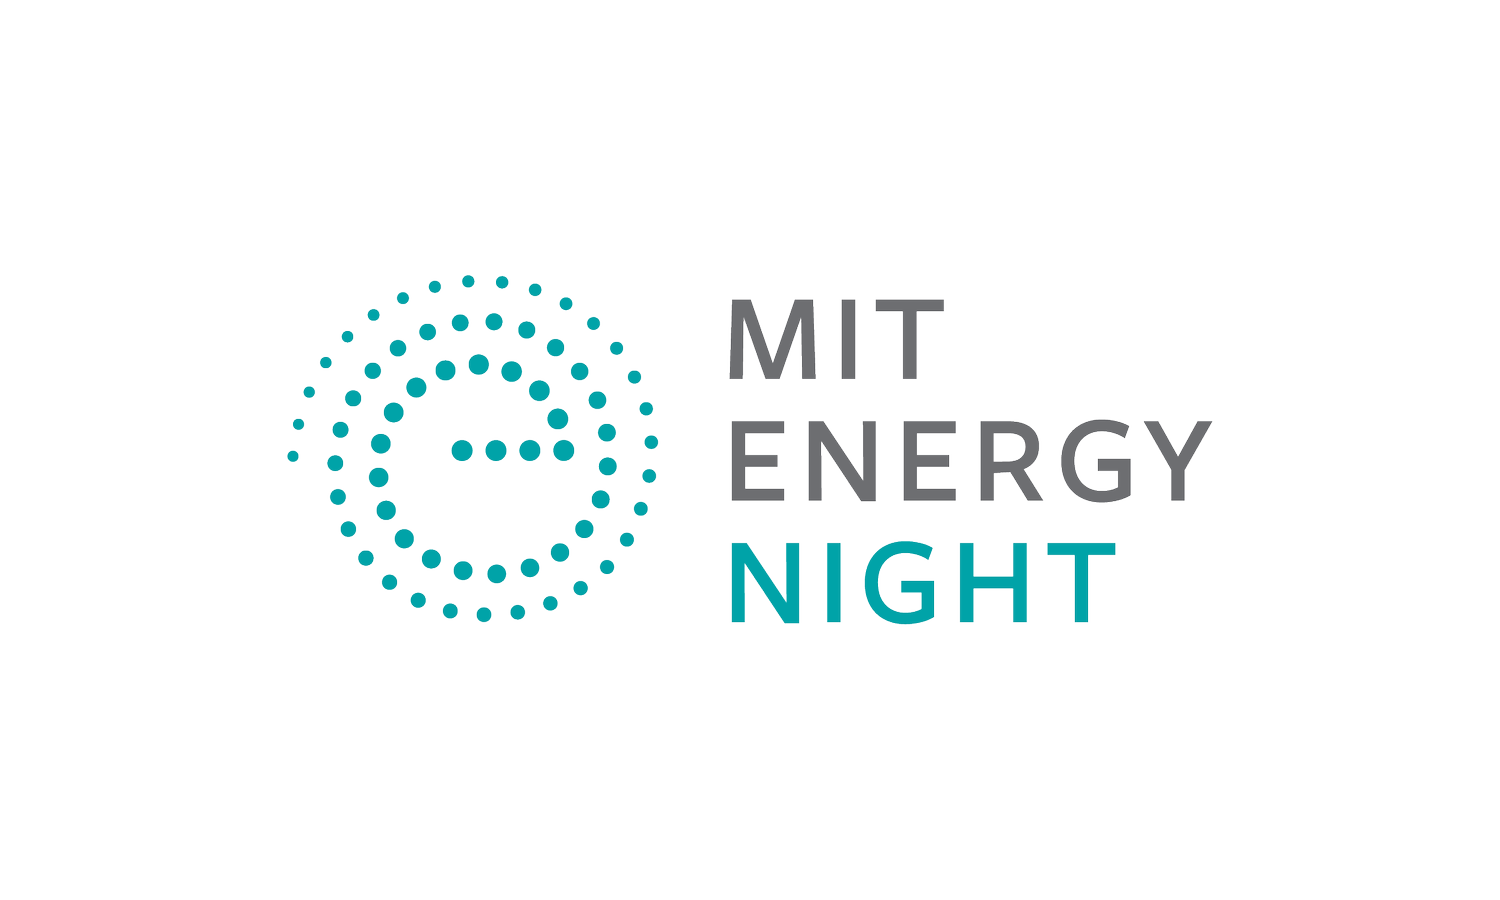 MIT Energy & Climate Night